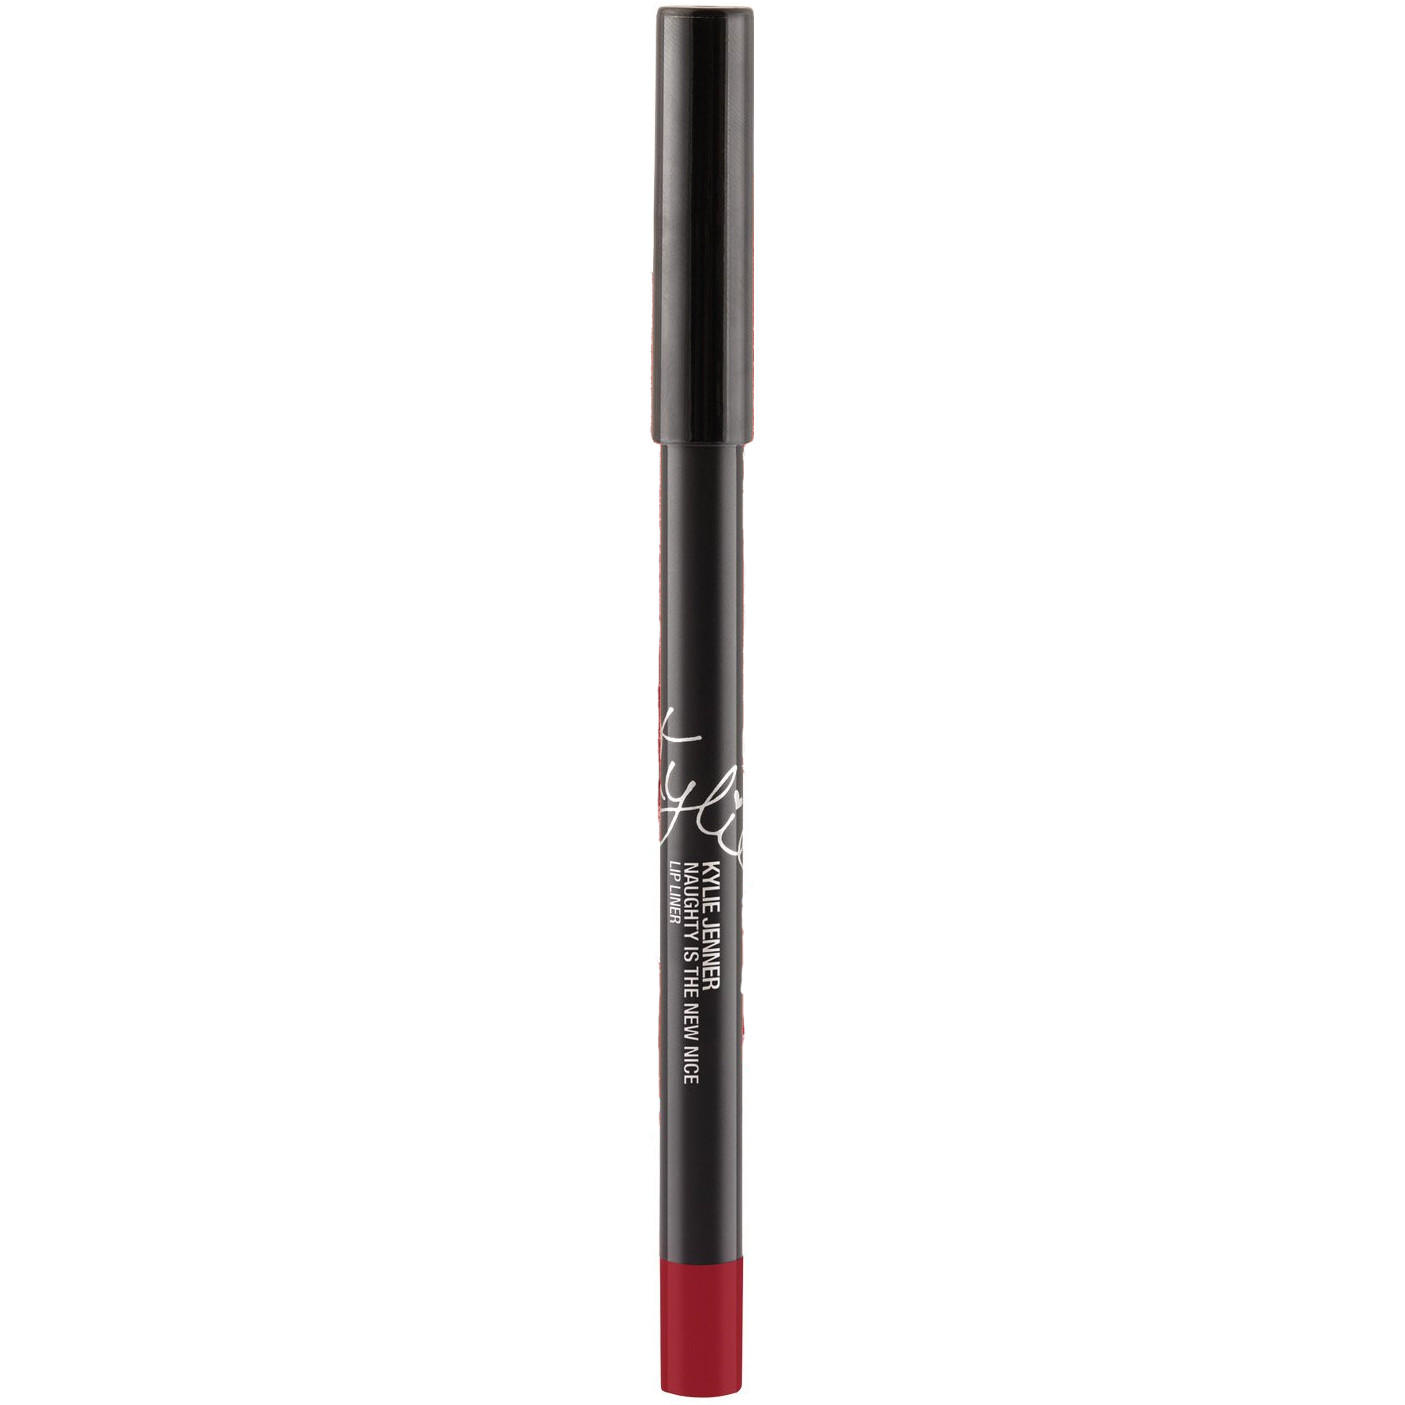 Kylie Cosmetics Lip Liner Naughty Is The New Nice